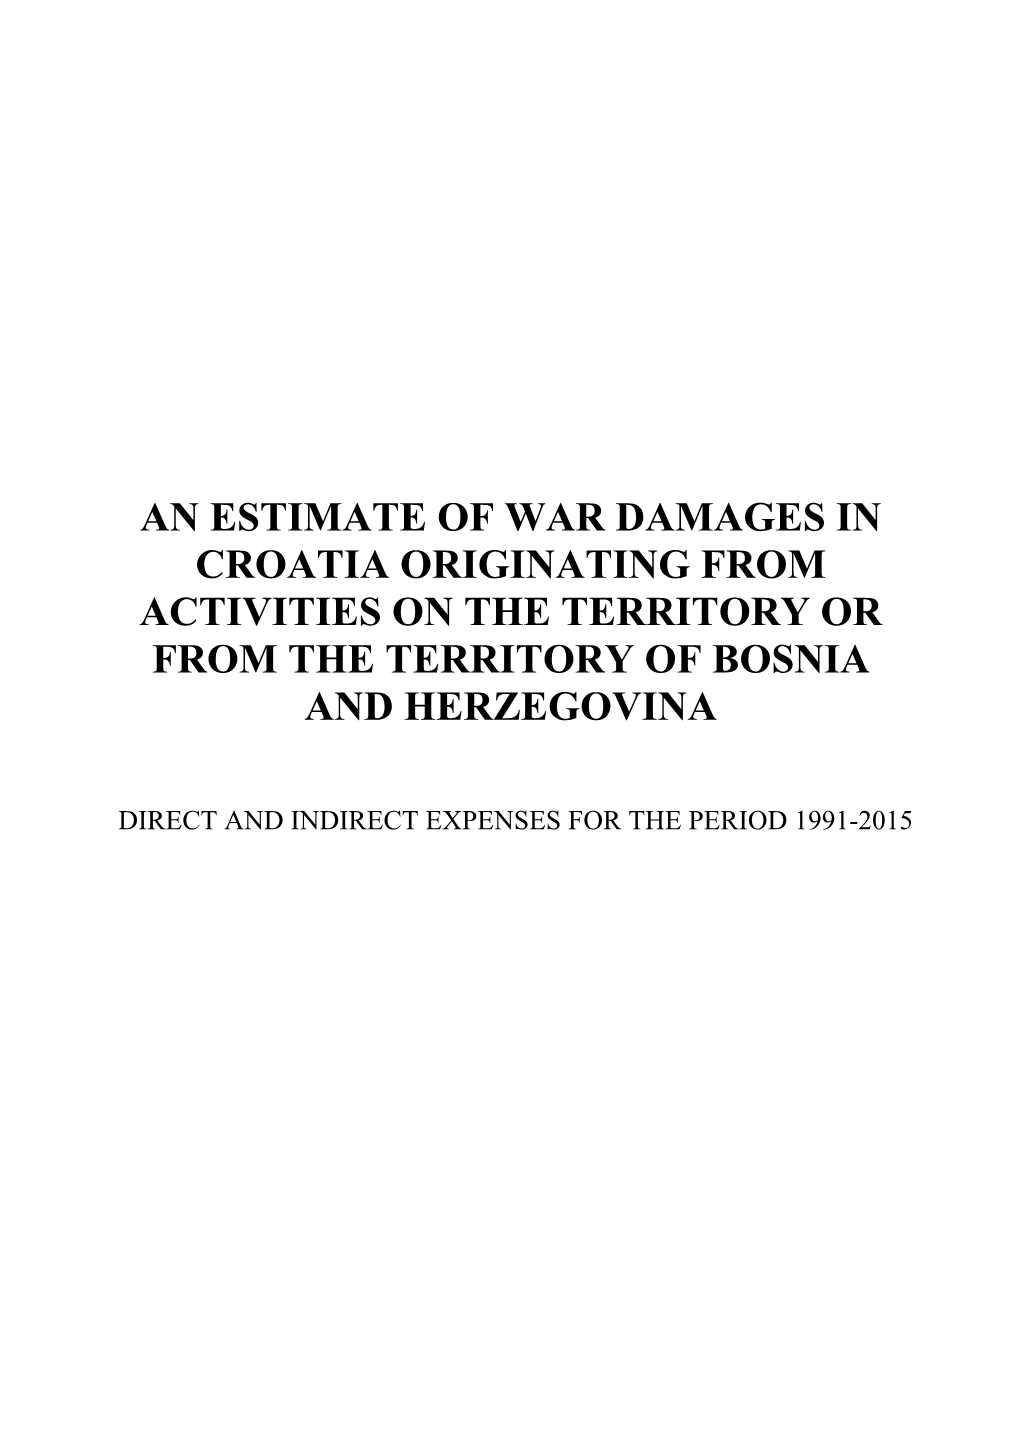 An Estimate of War Damages in Croatia Originating from Activities on the Territory Or from the Territory of Bosnia and Herzegovina